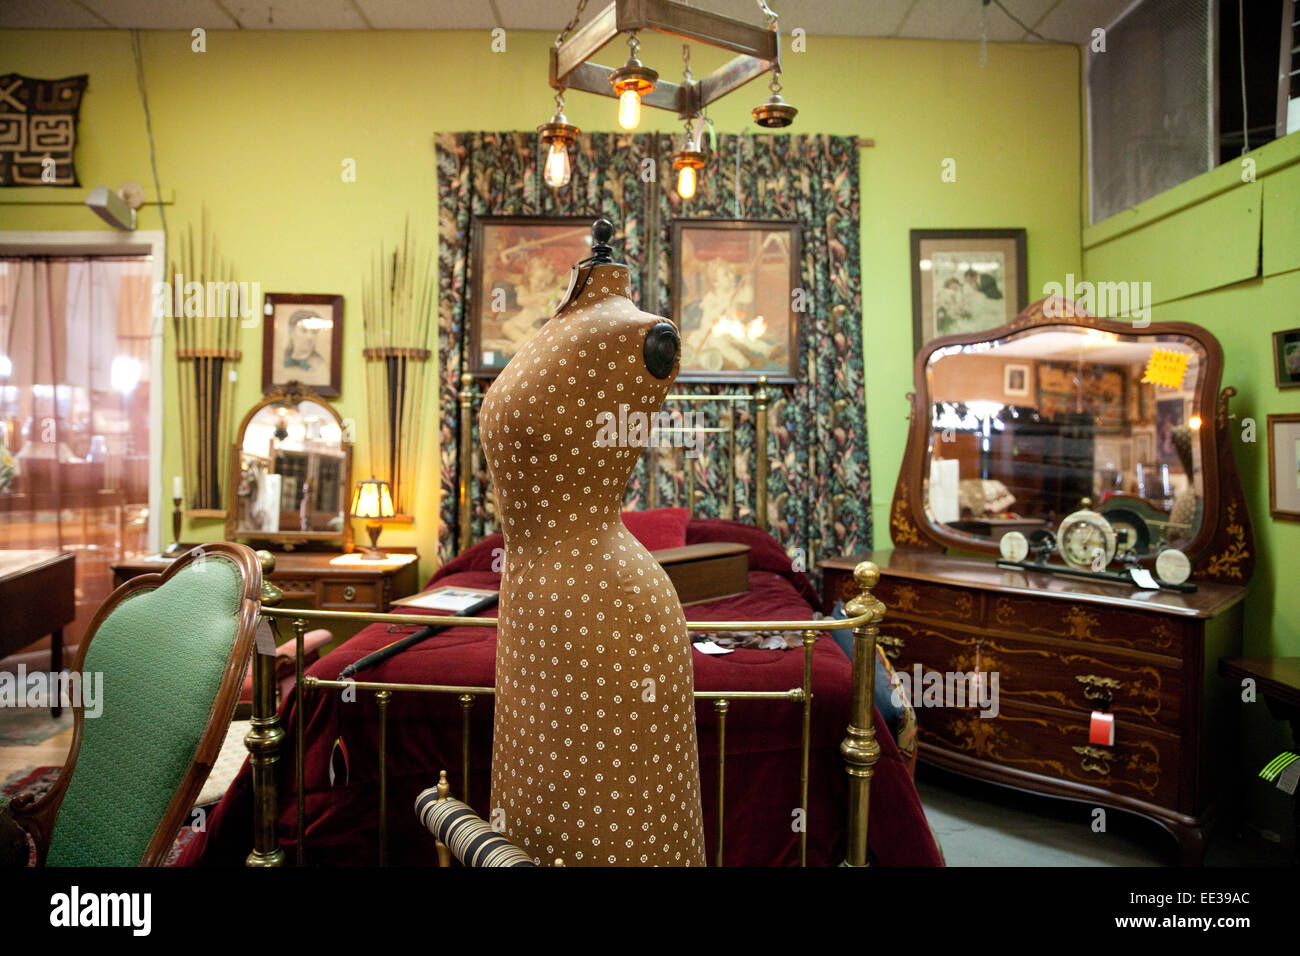 Interior of antique store in southwestern USA. Stock Photo